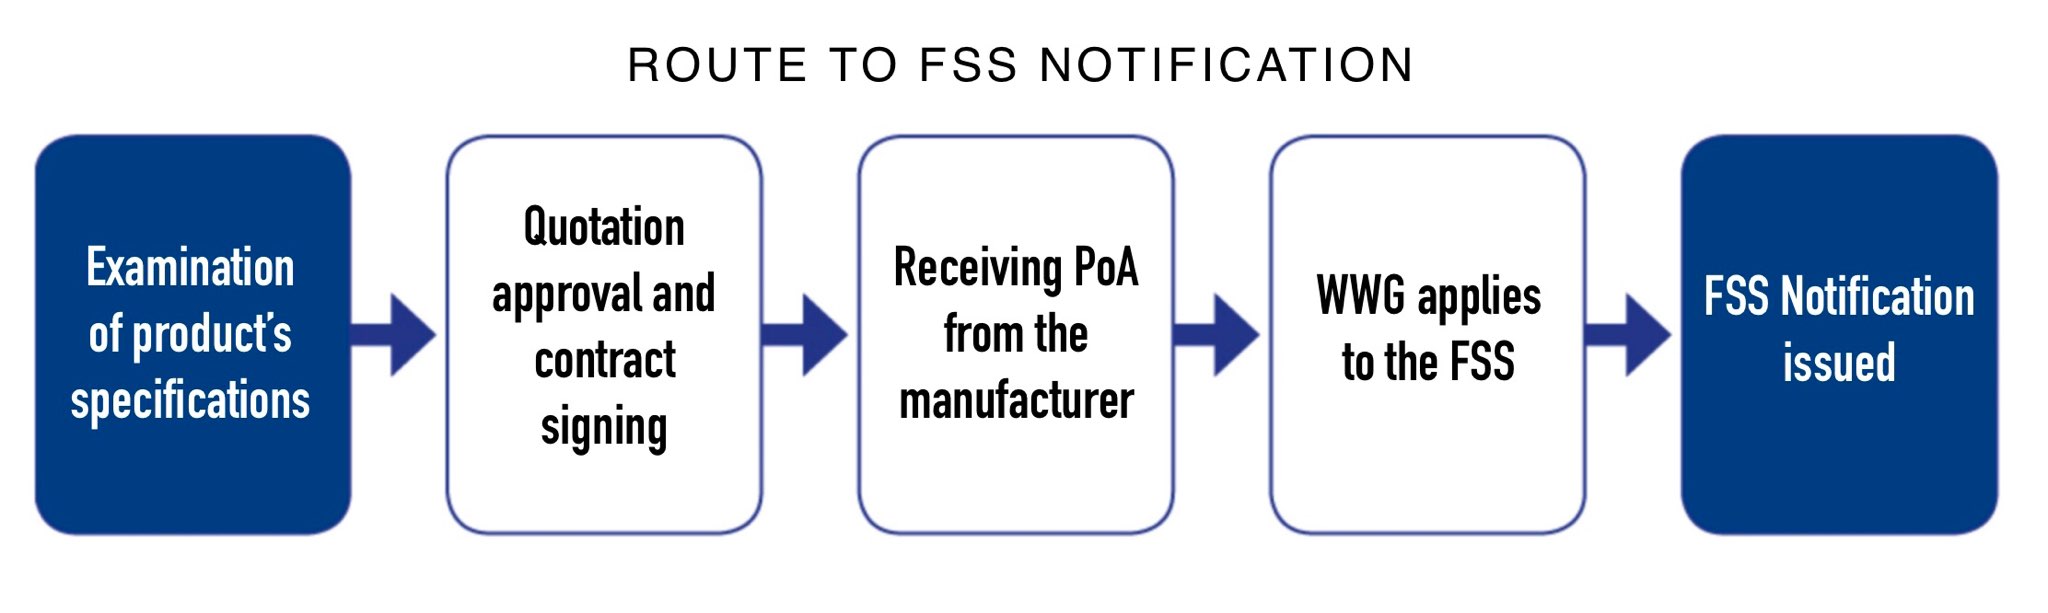 Route to FSS Notification 1